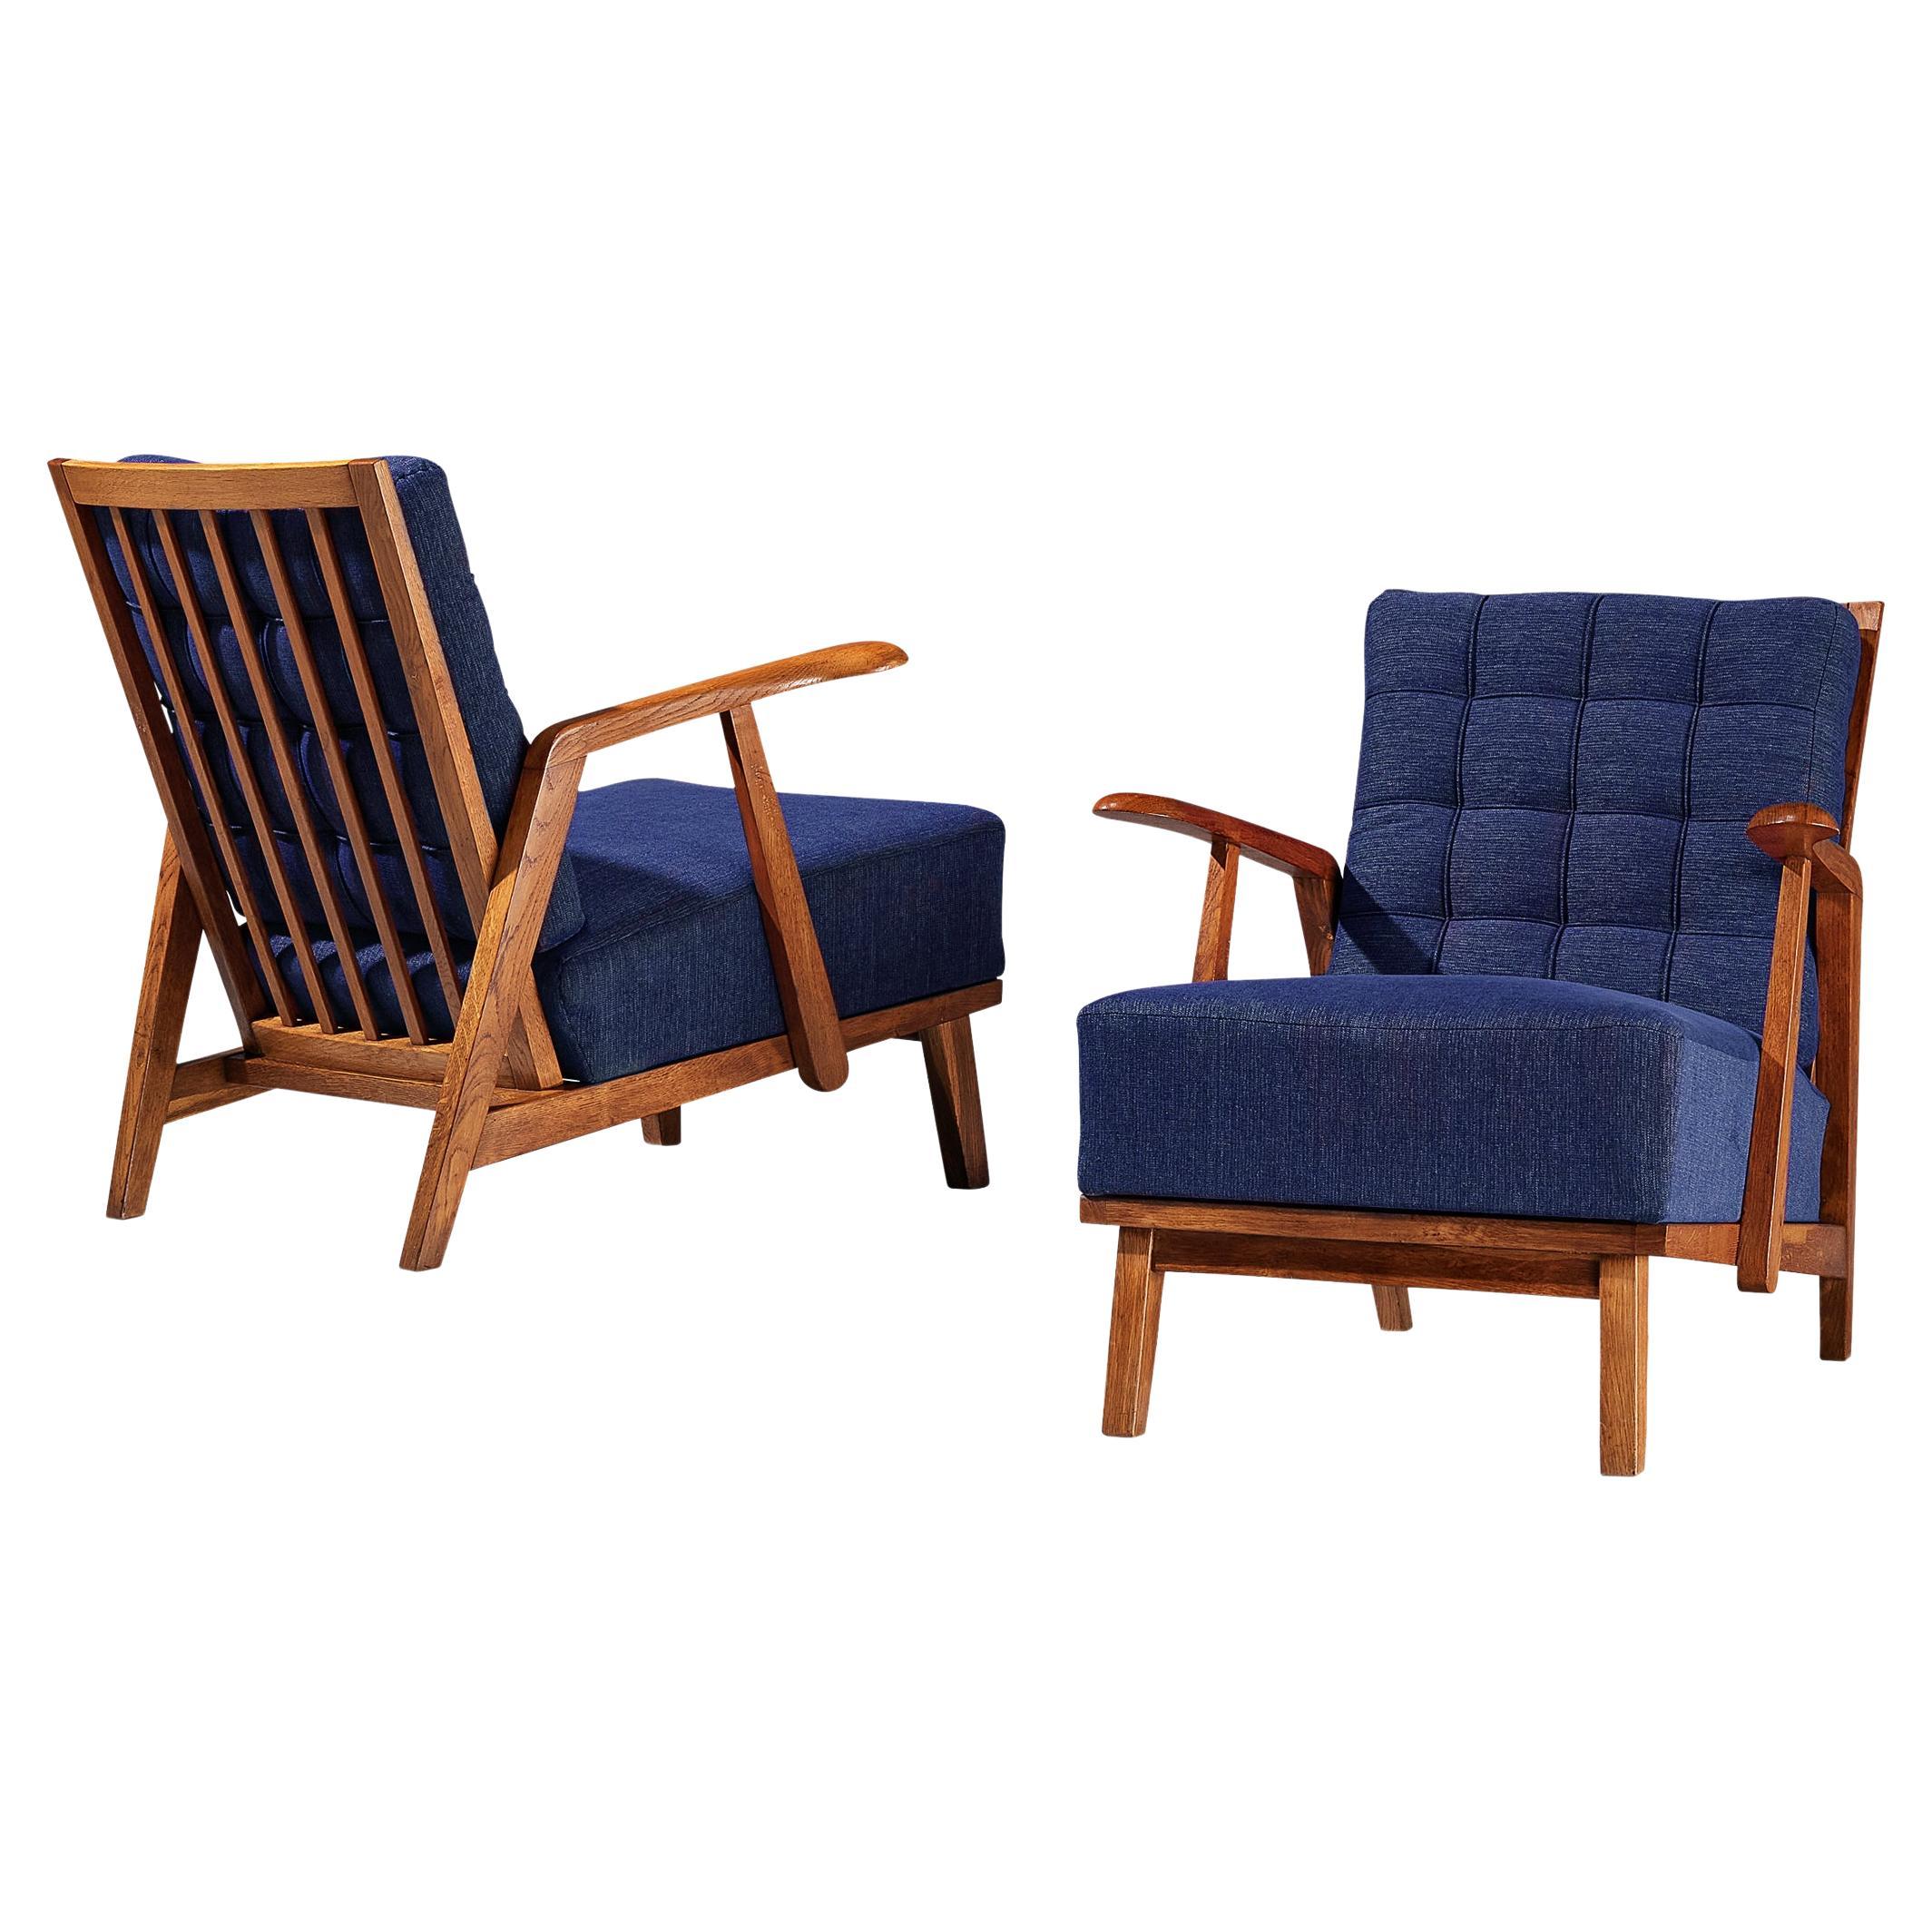 Pair of Lounge Chairs in Oak With Slatted Backs in Dark Blue Upholstery  For Sale